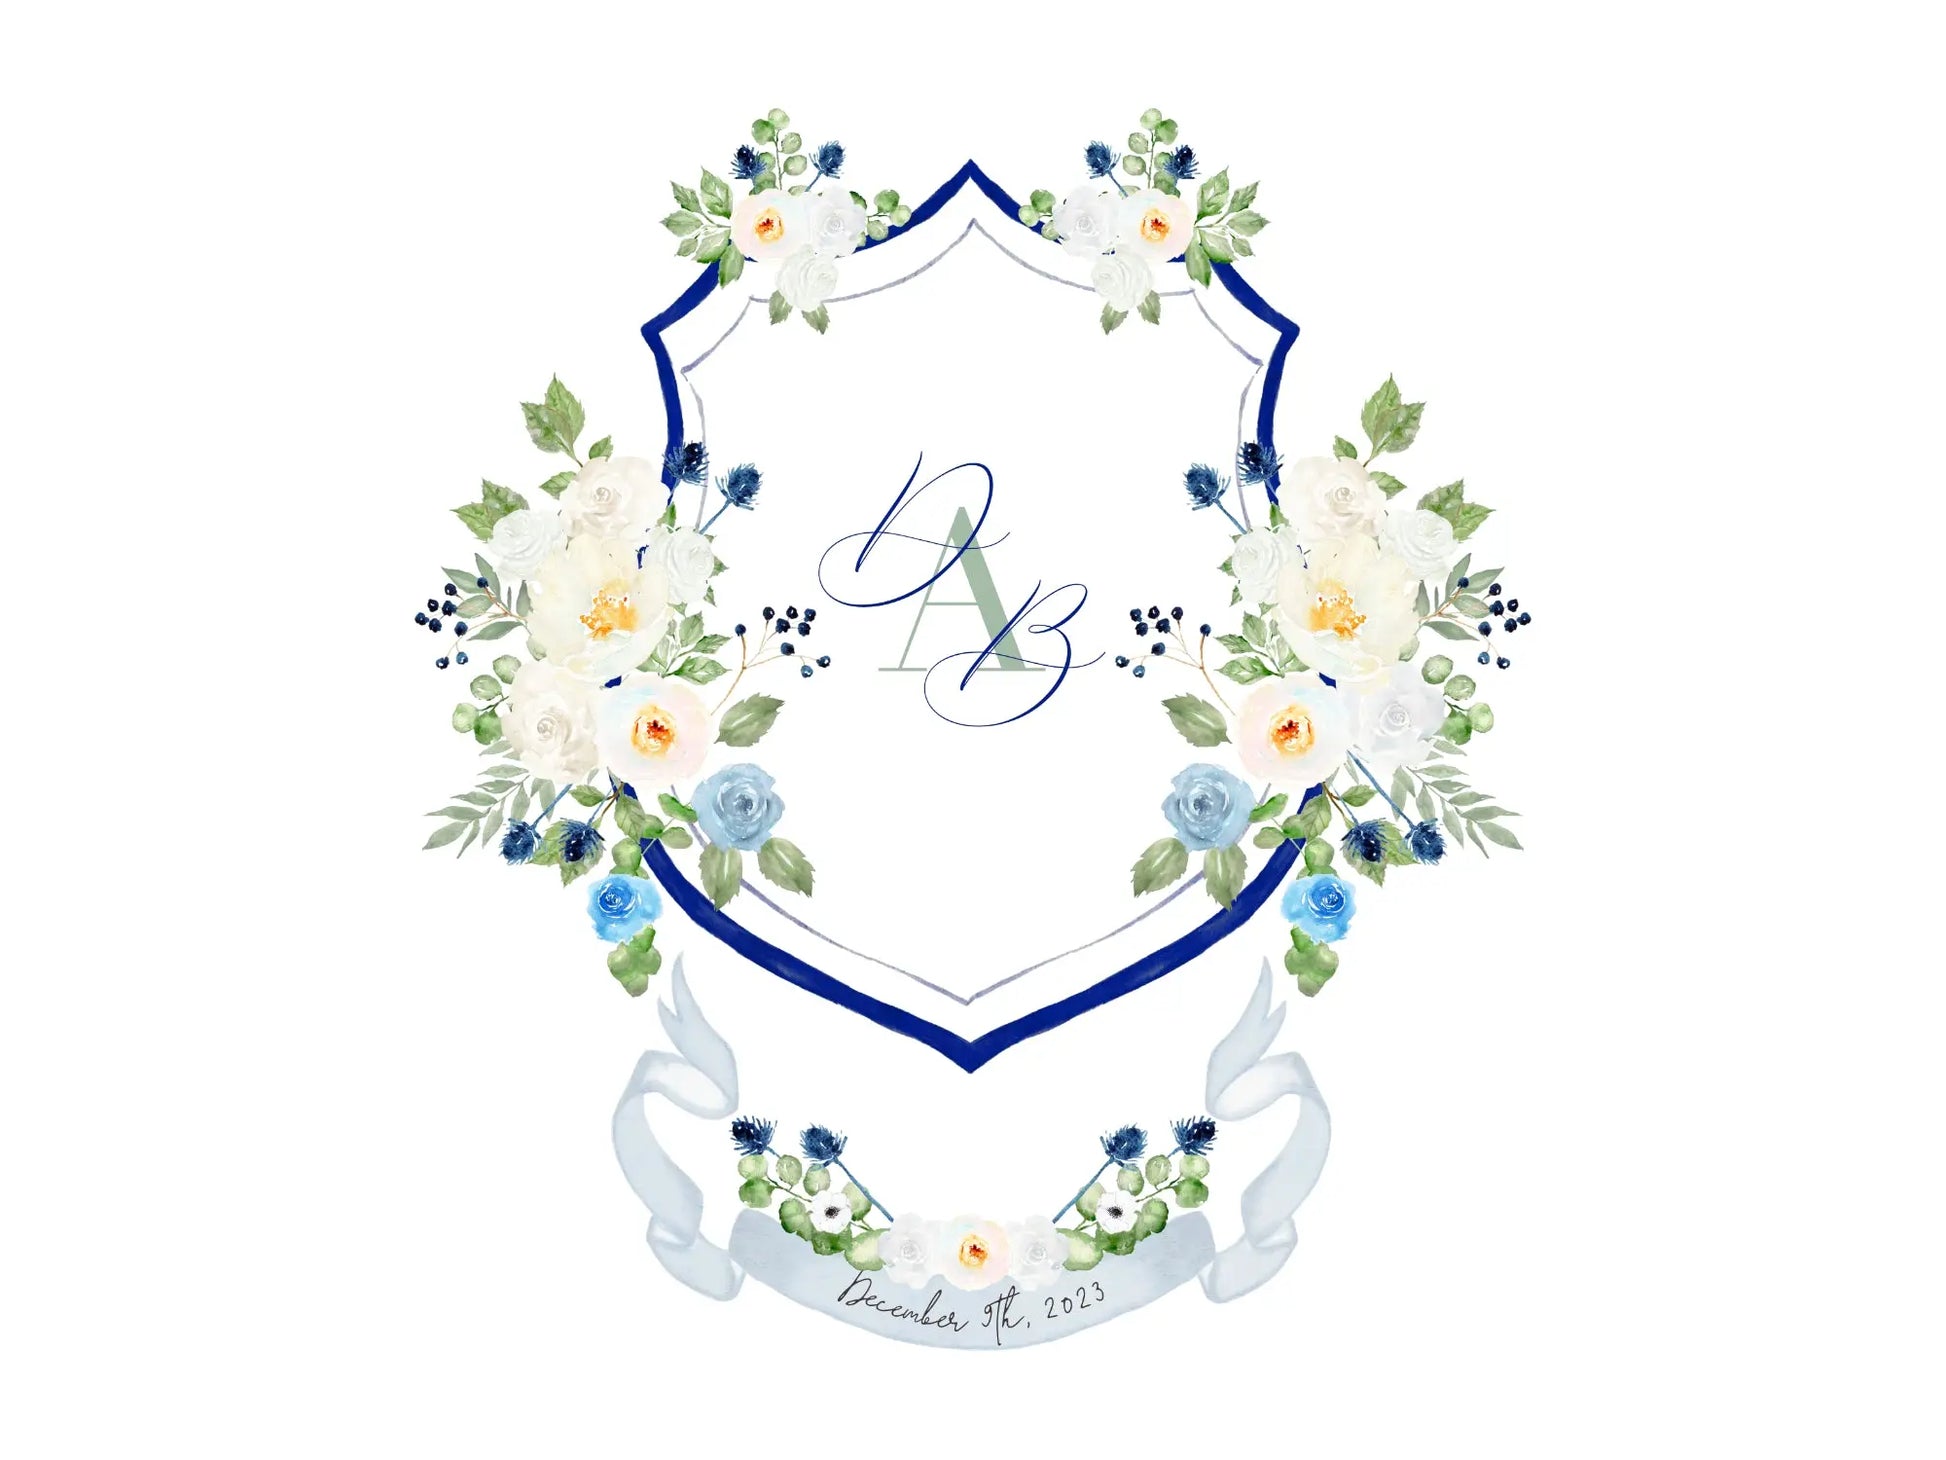 White Roses and Peonies wedding crest, monogram crest, watercolor crest, white floral crest The Wedding Crest Lab